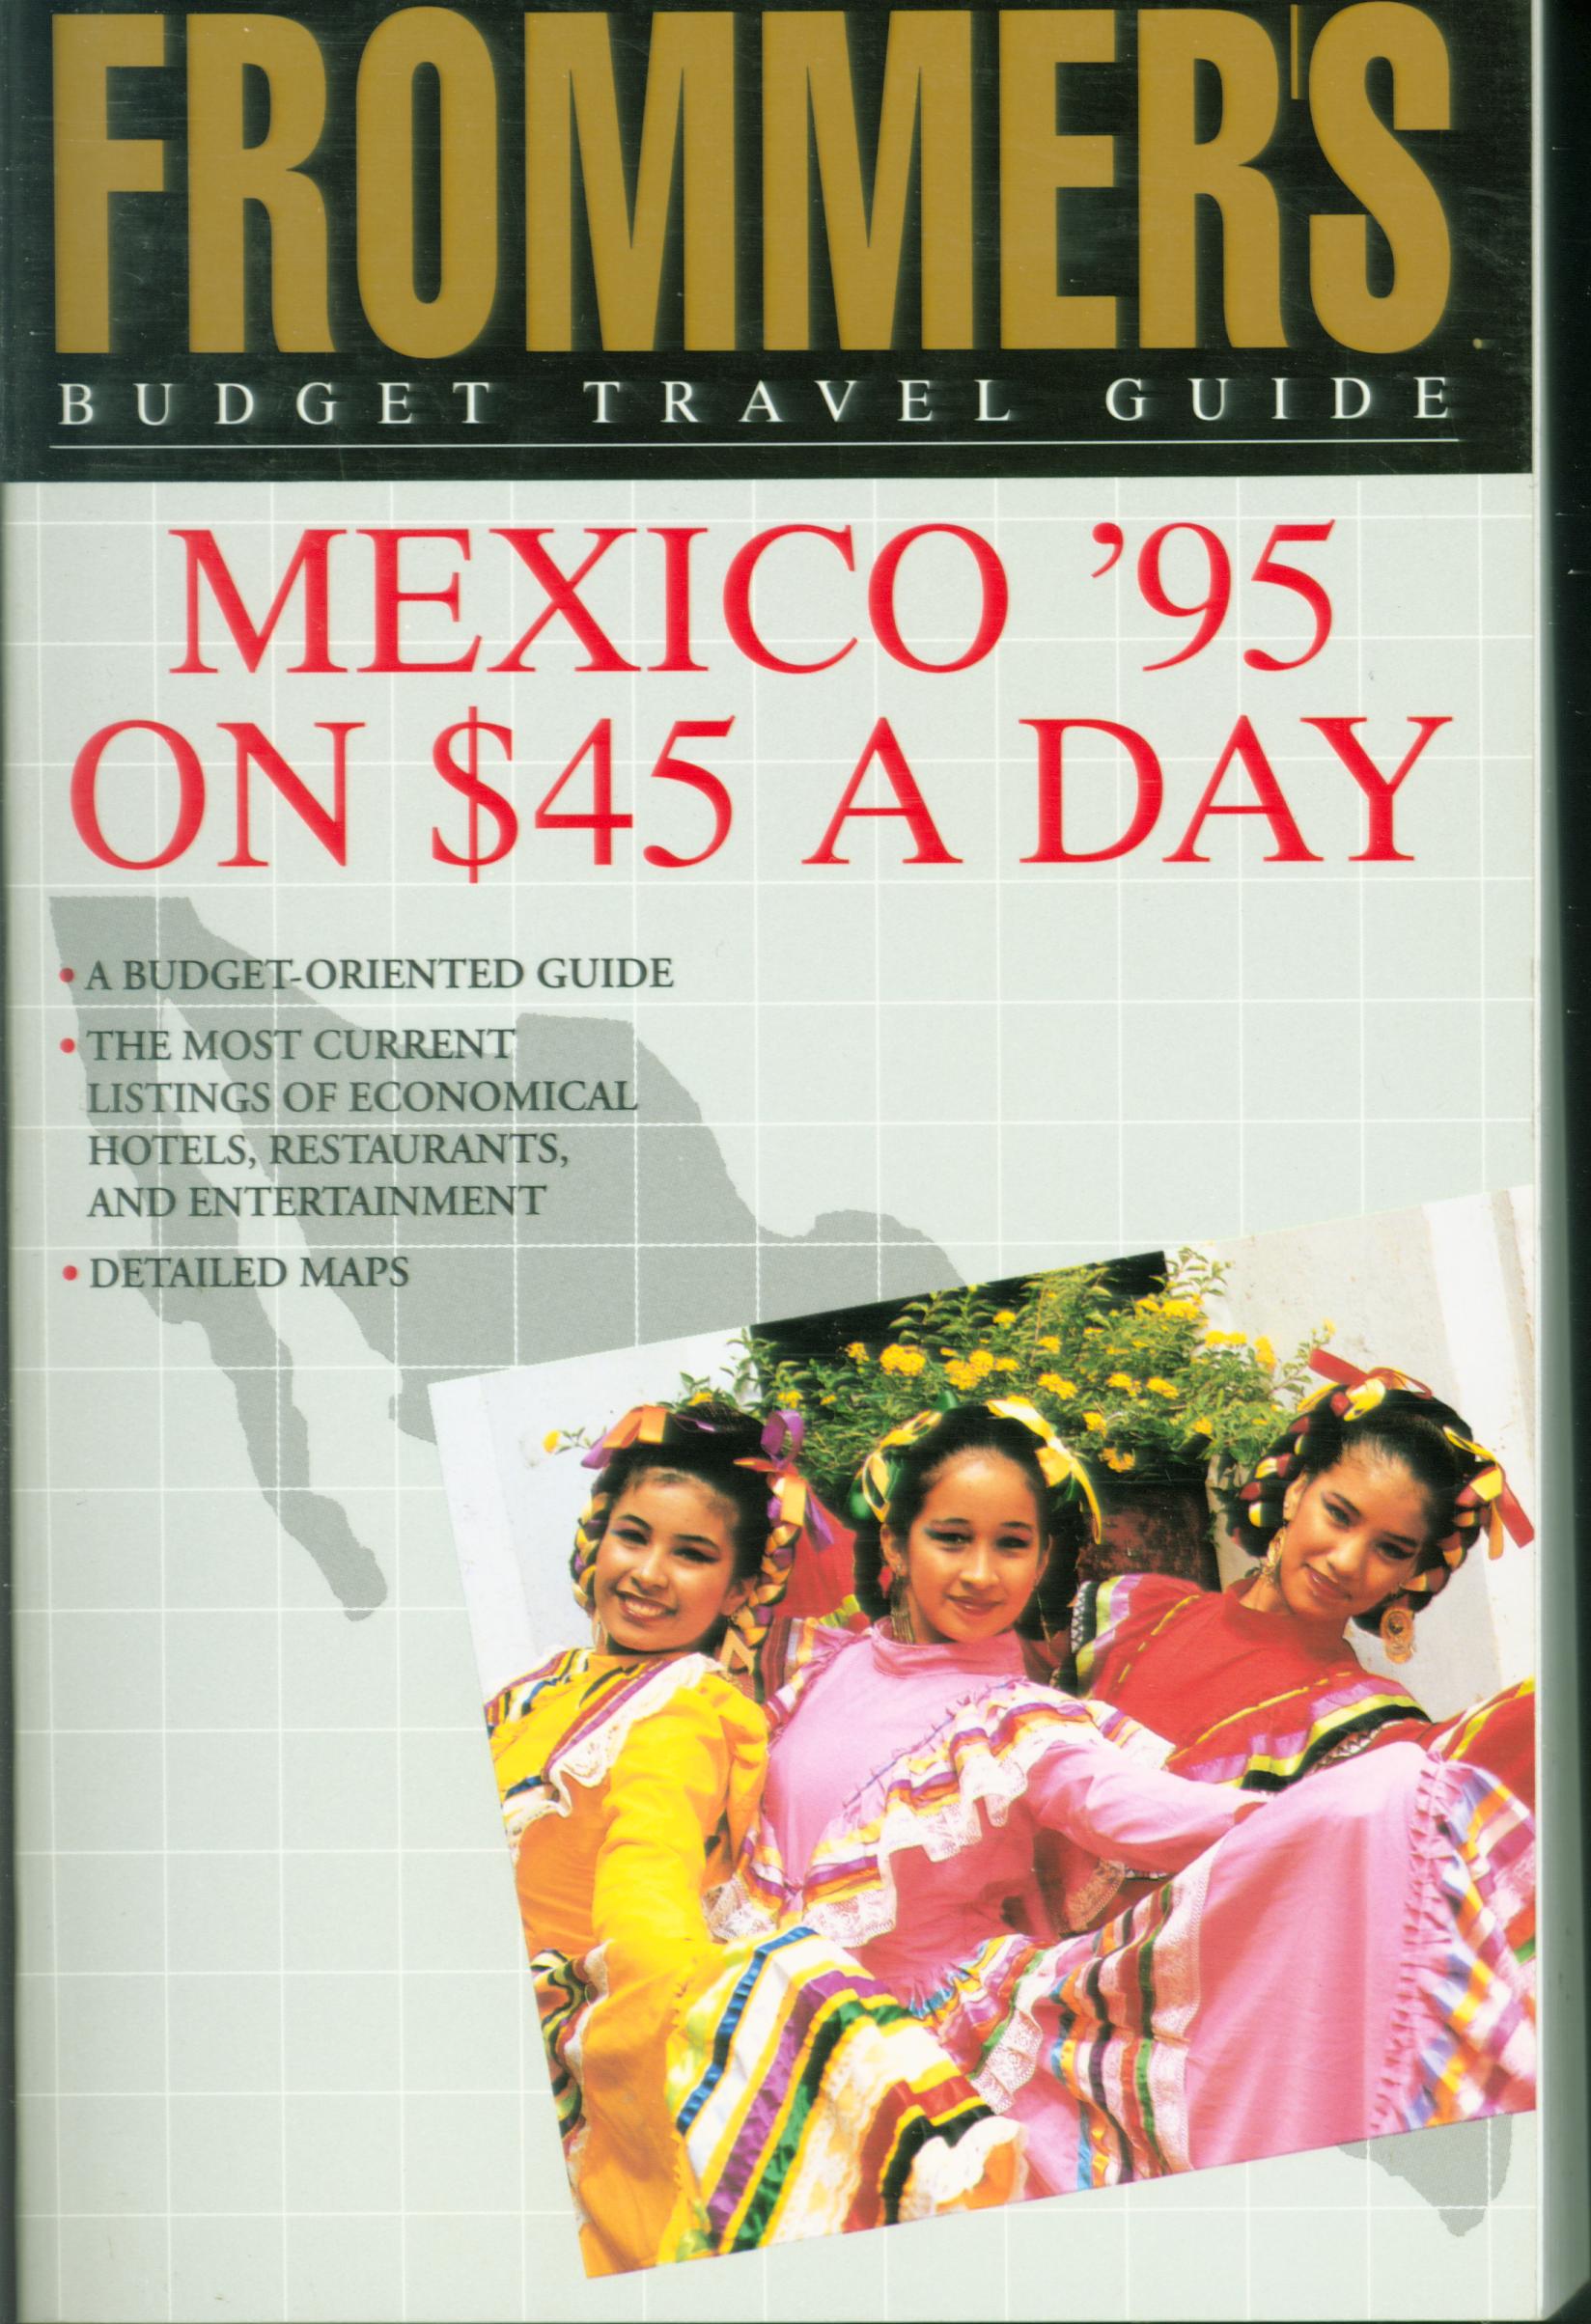 FROMMER'S BUDGET TRAVEL GUIIDE: Mexico '95 on $45 a day. 